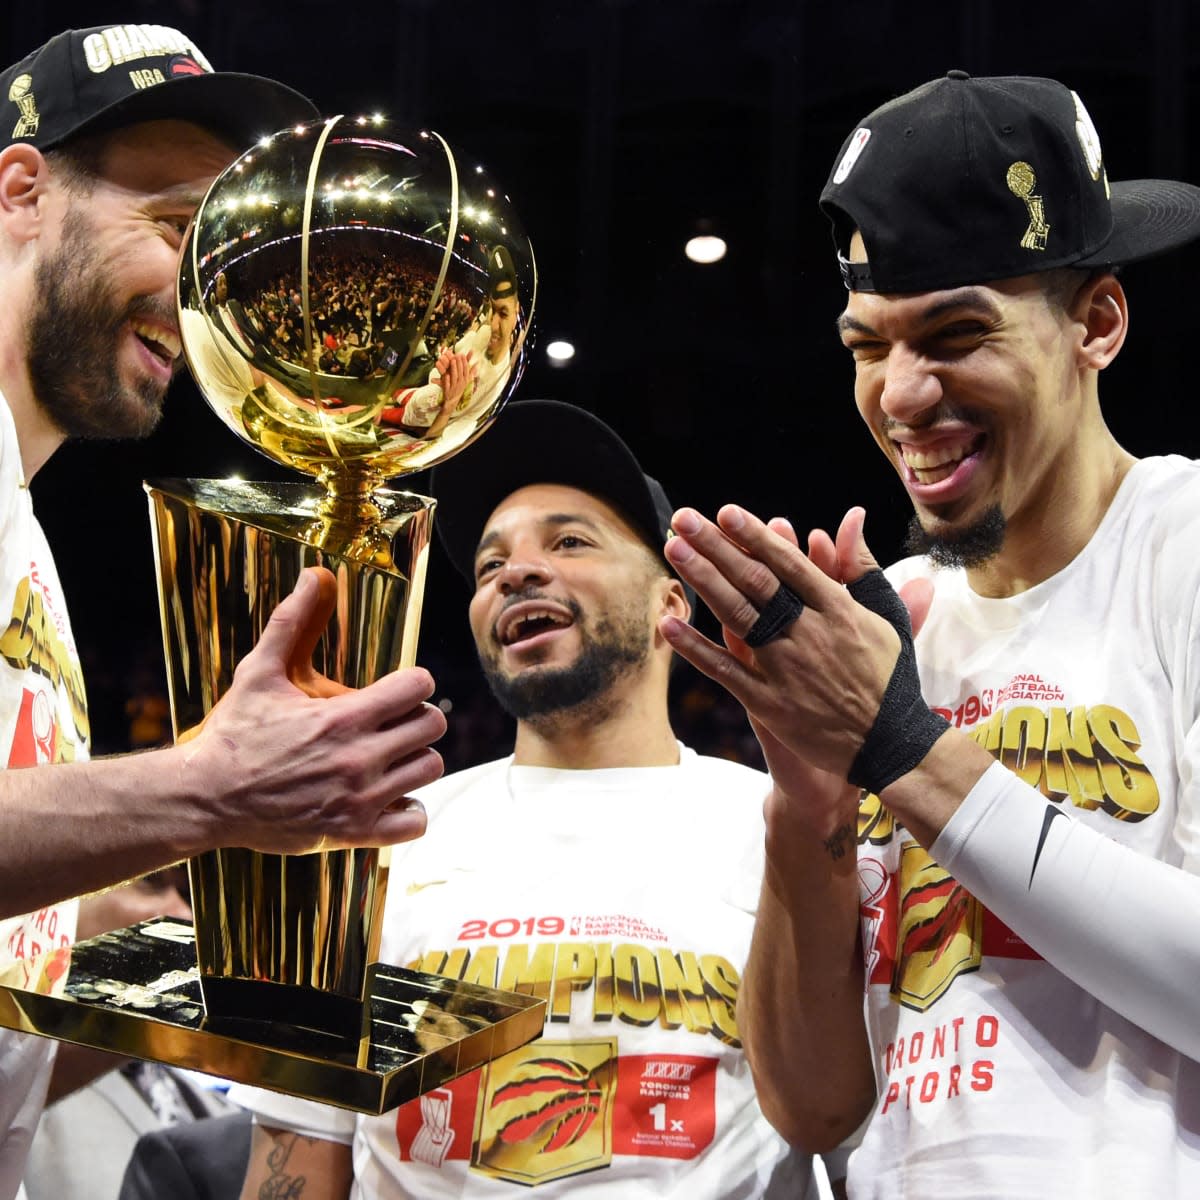 Danny Green with the Larry O'Brien trophy after winning it all in 2019